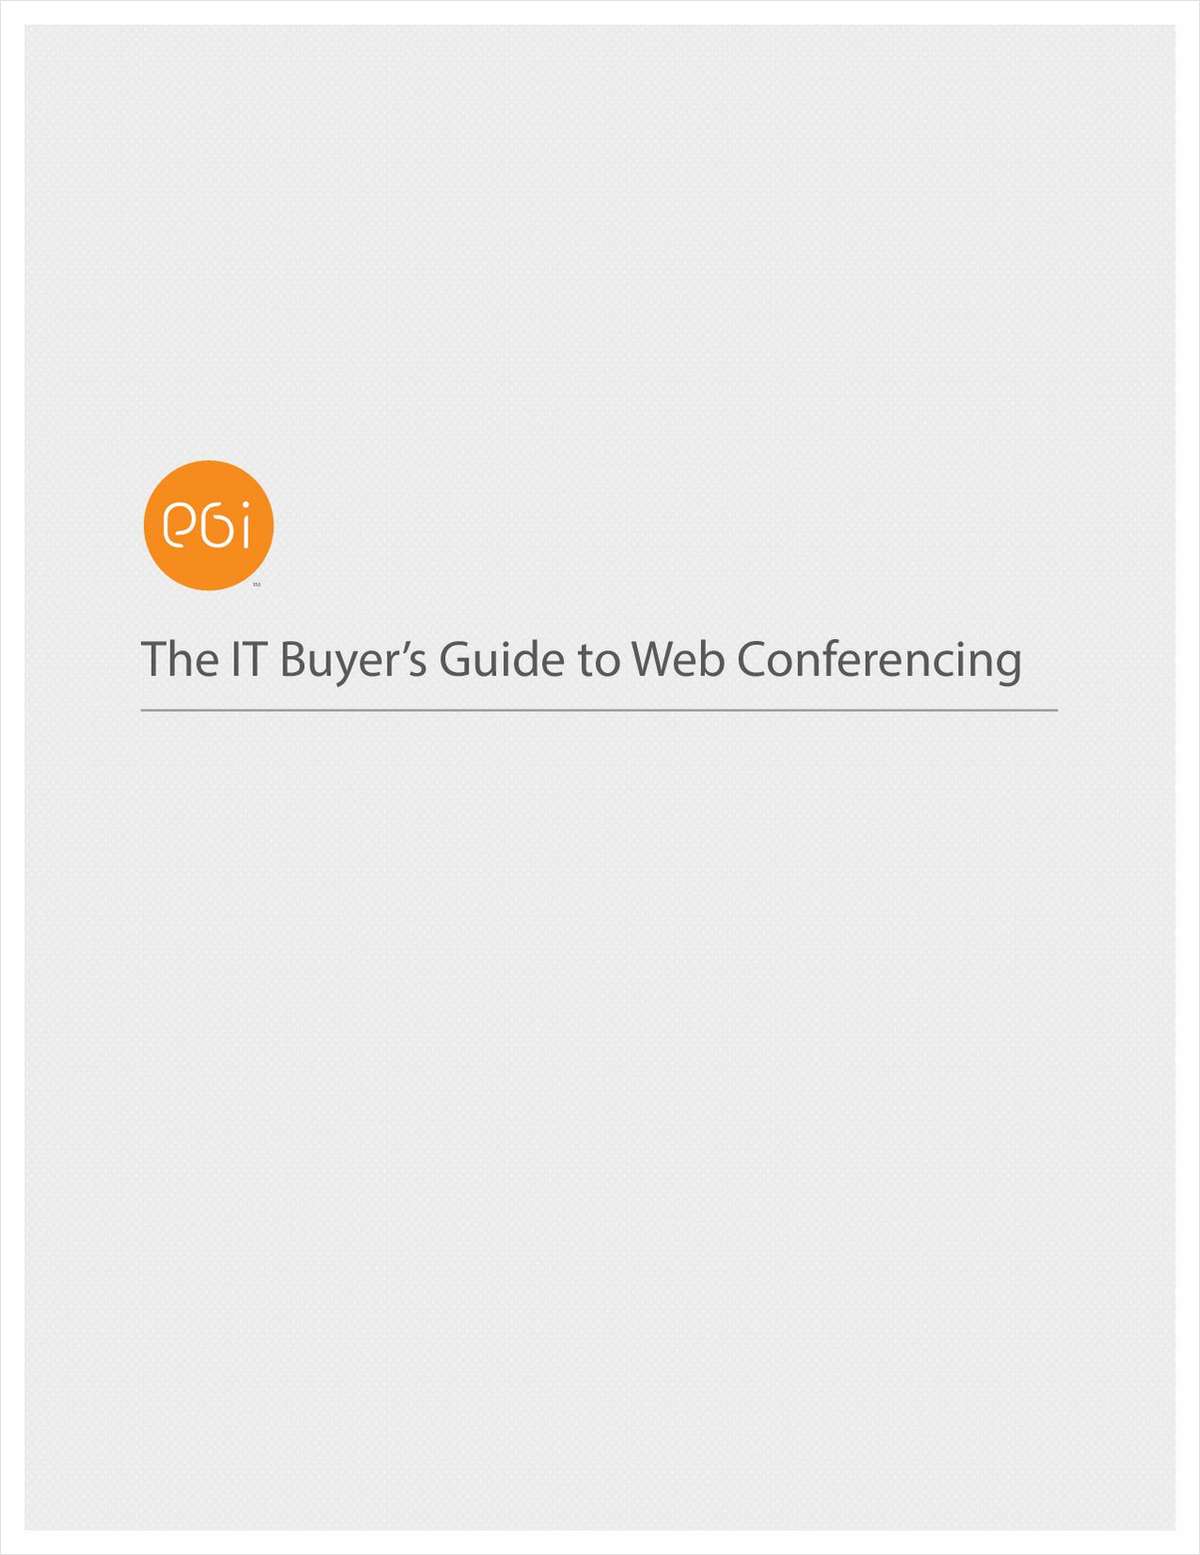 The IT Buyer's Guide to Web Conferencing